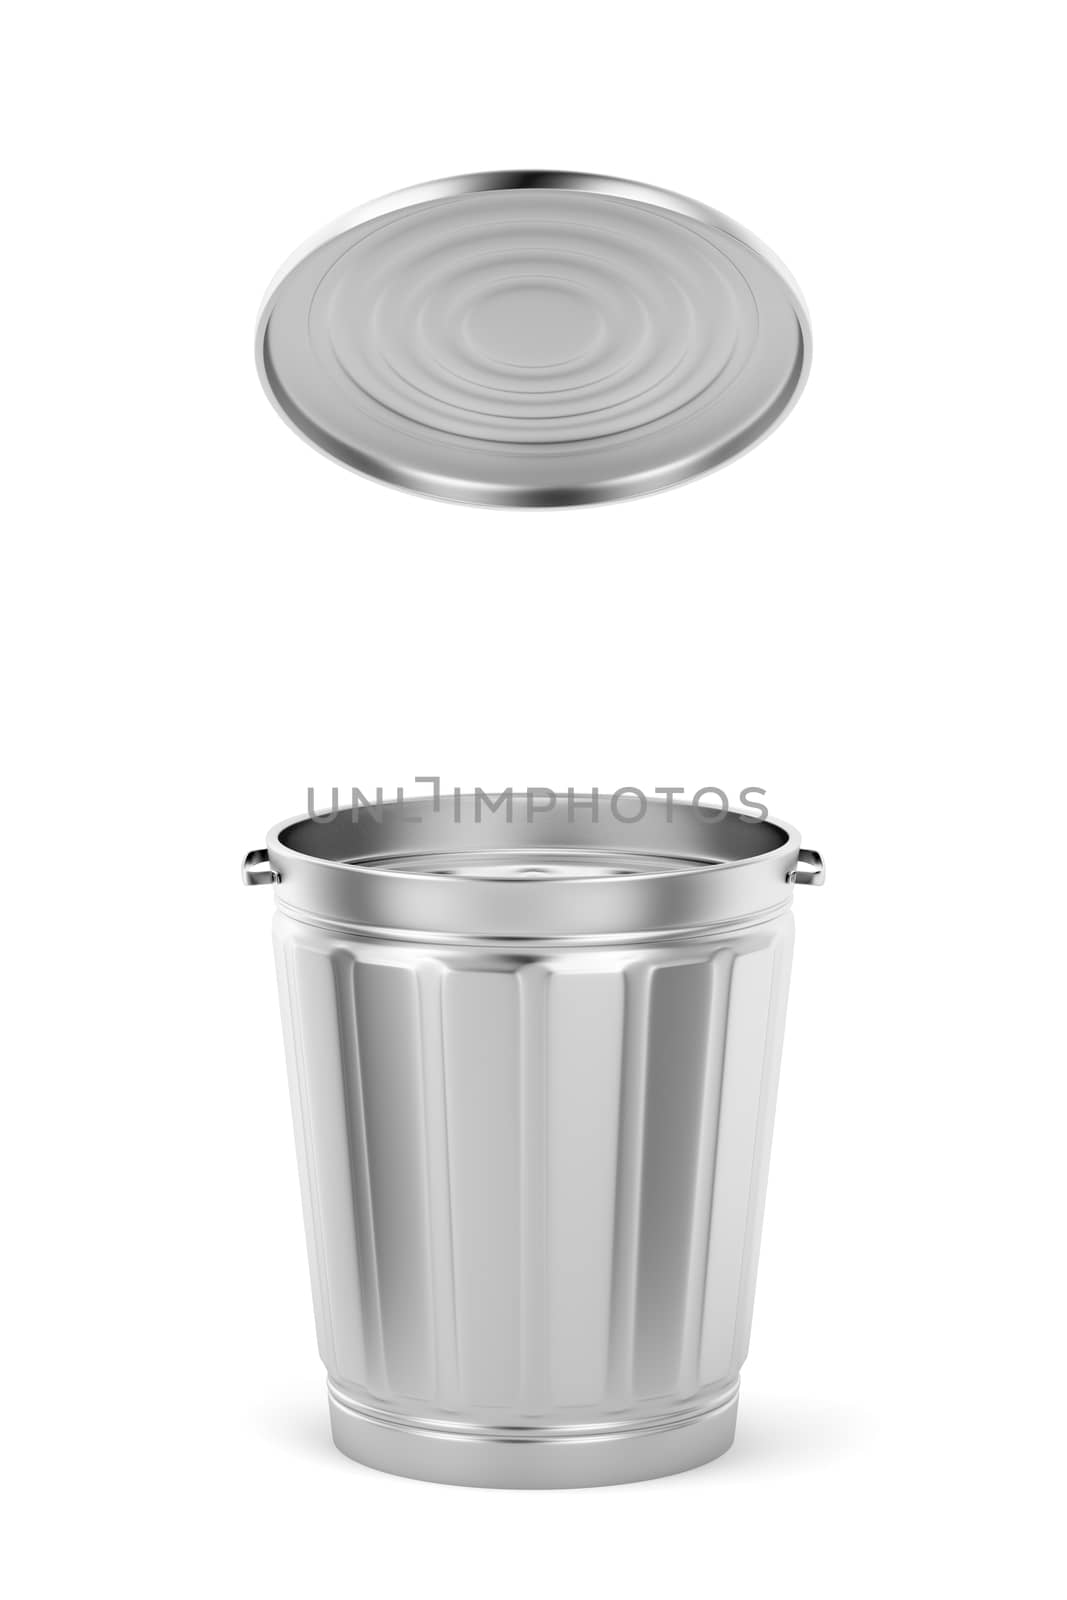 Metal trash can with lid by magraphics